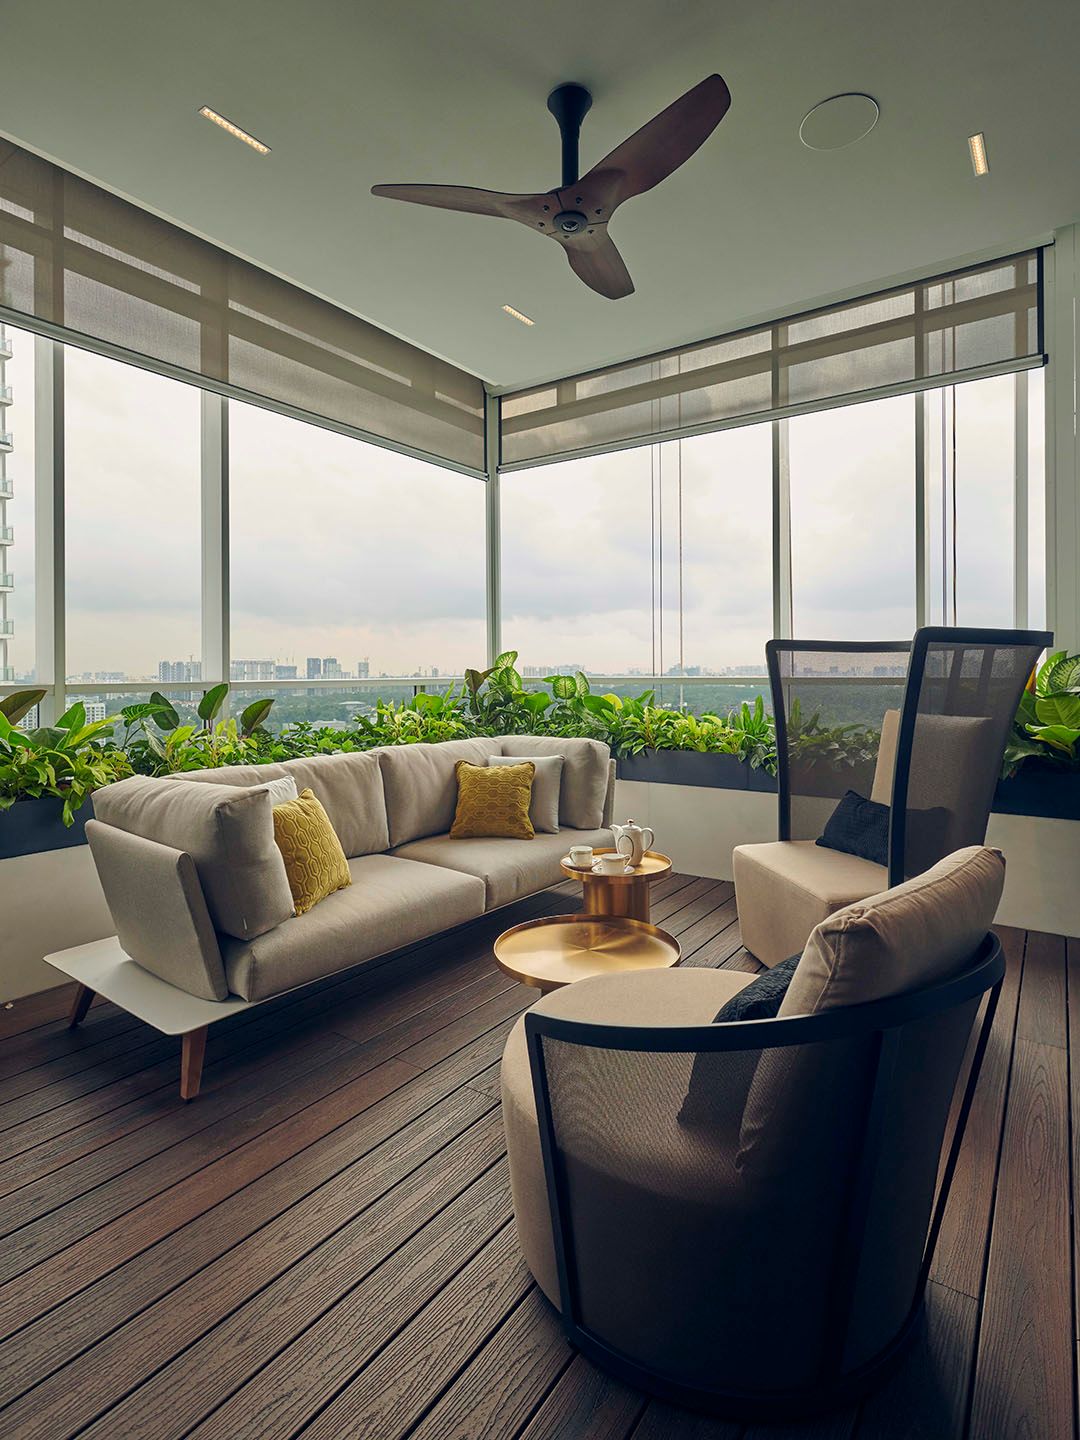 Zipscreen outdoor blinds in a condo apartment balcony in Singapore